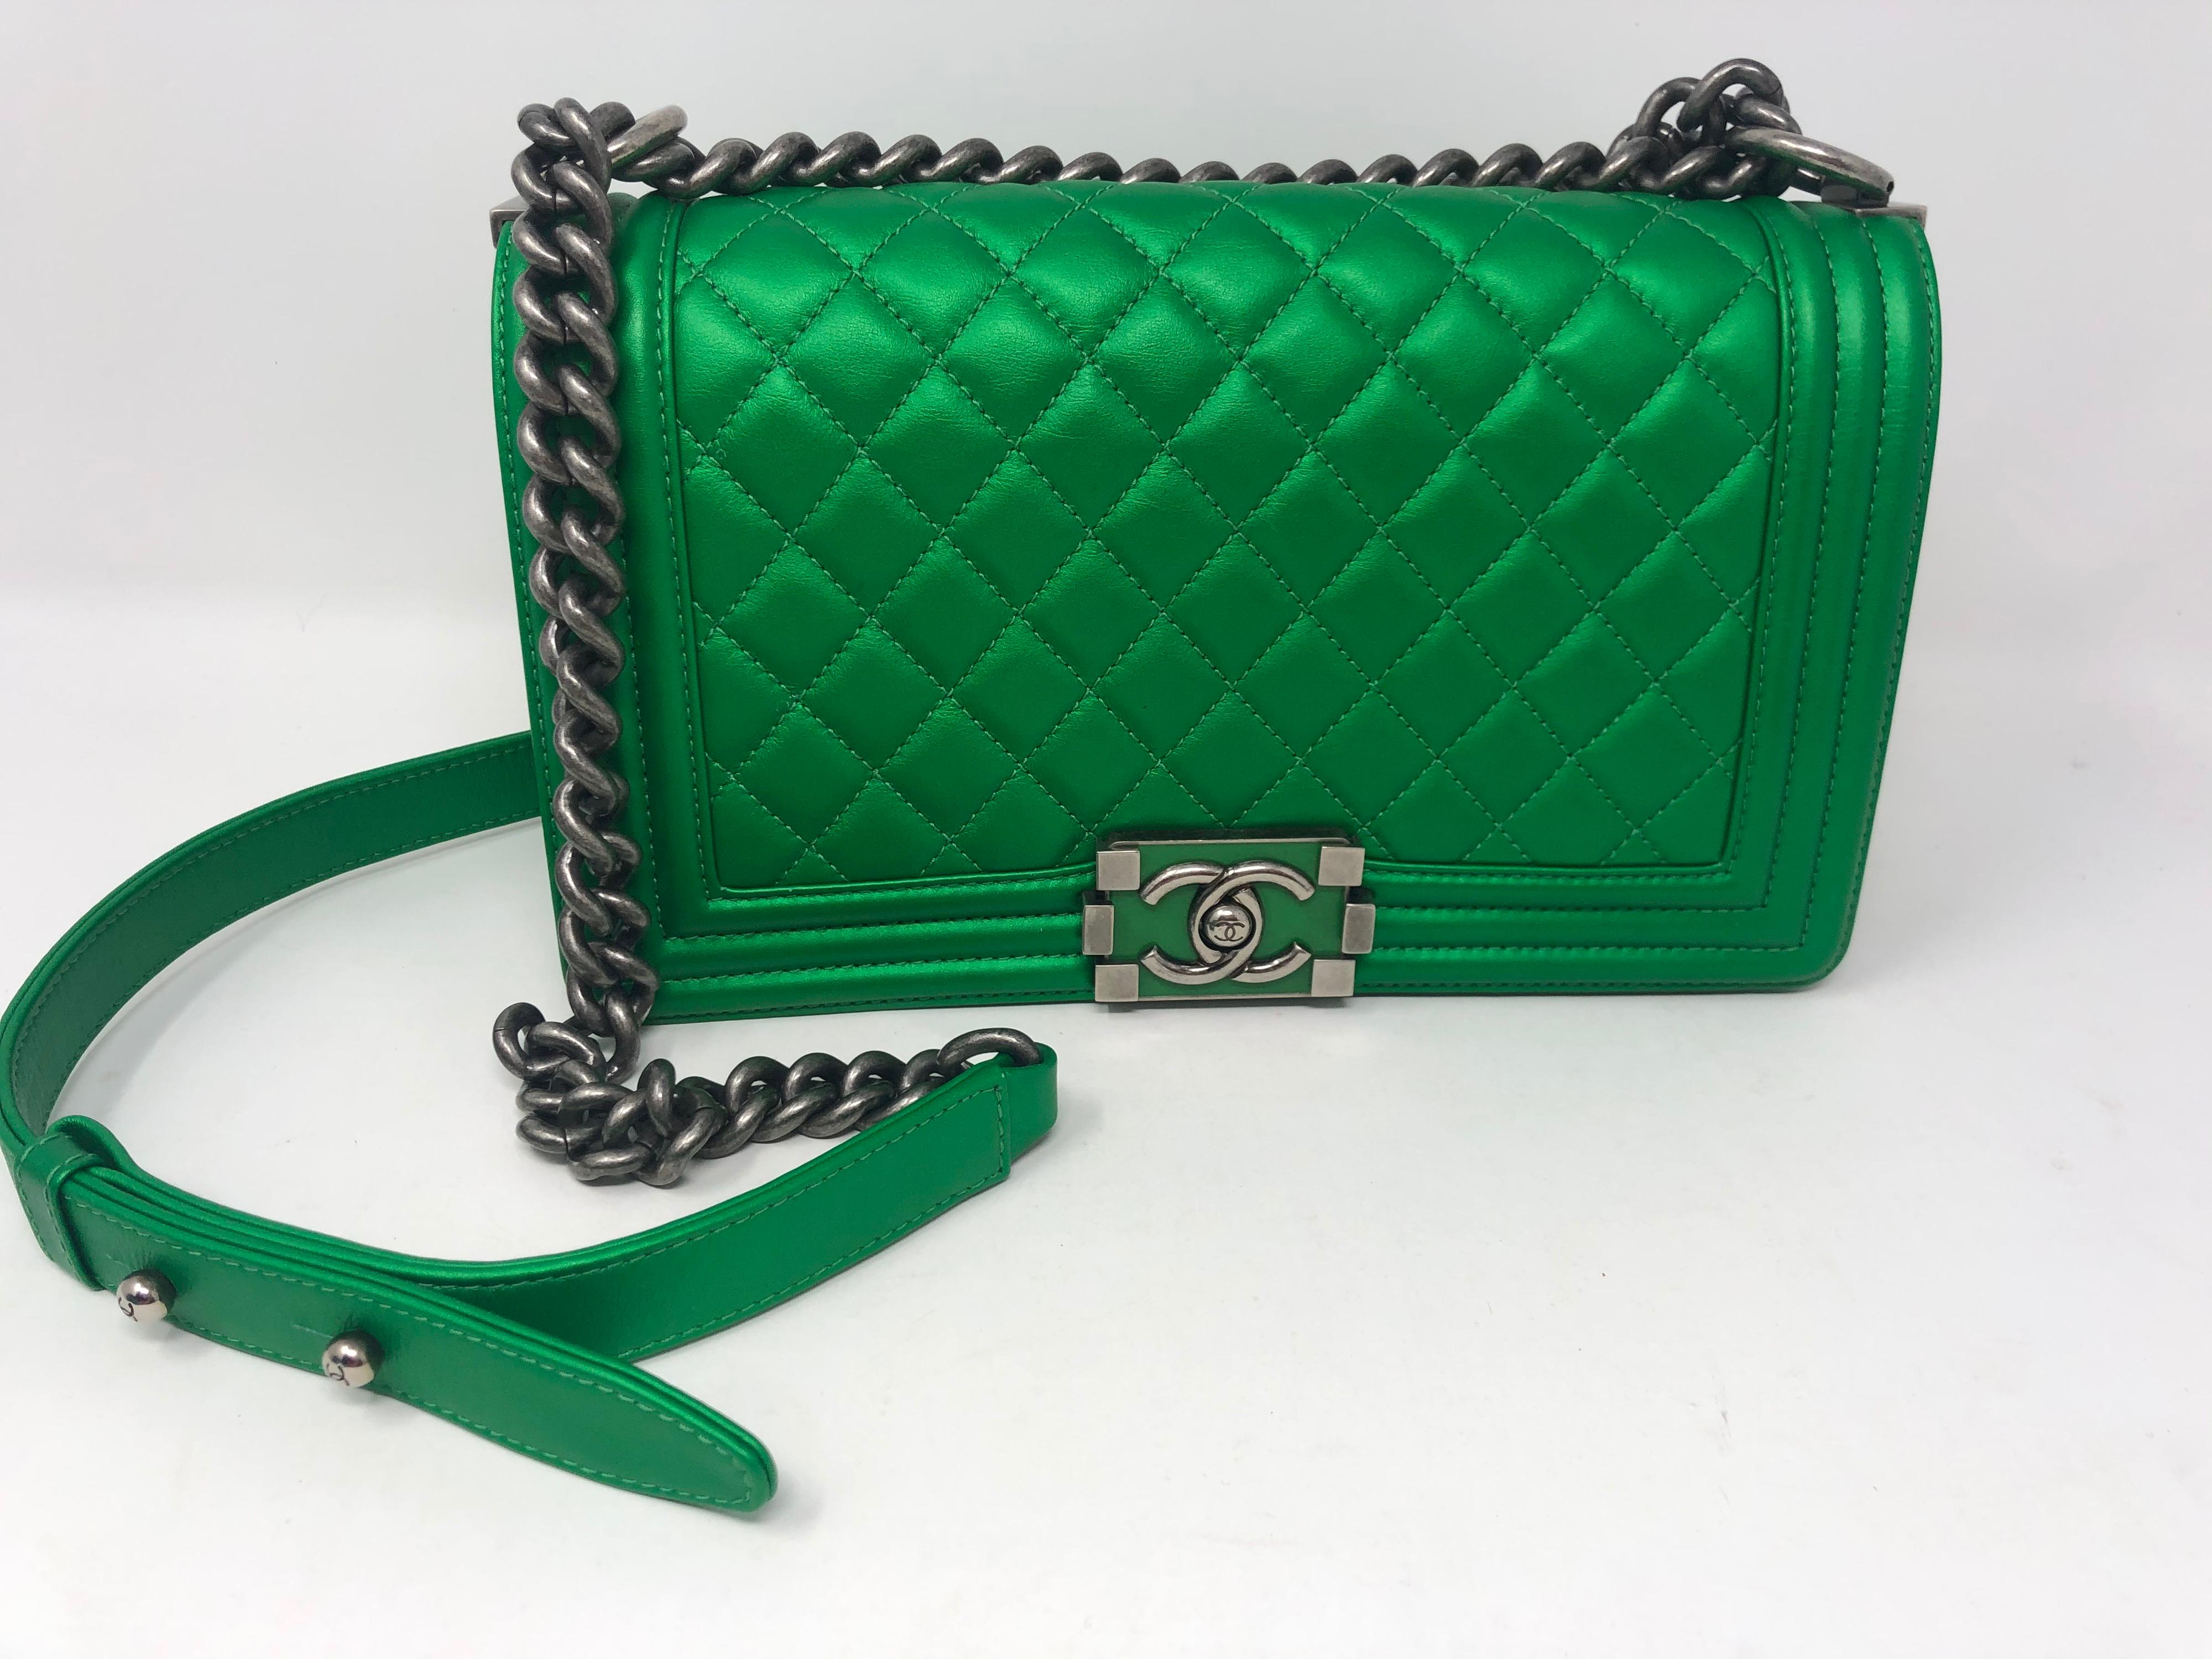 Chanel Metallic Green Boy Bag. Excellent condition. Only has a light scratch on bottom of bag. Please see photos. Rare color Chanel bag. Medium size bag. Ruthenium hardware. Can be worn crossbody or doubled as a shoulder bag. Guaranteed authentic. 